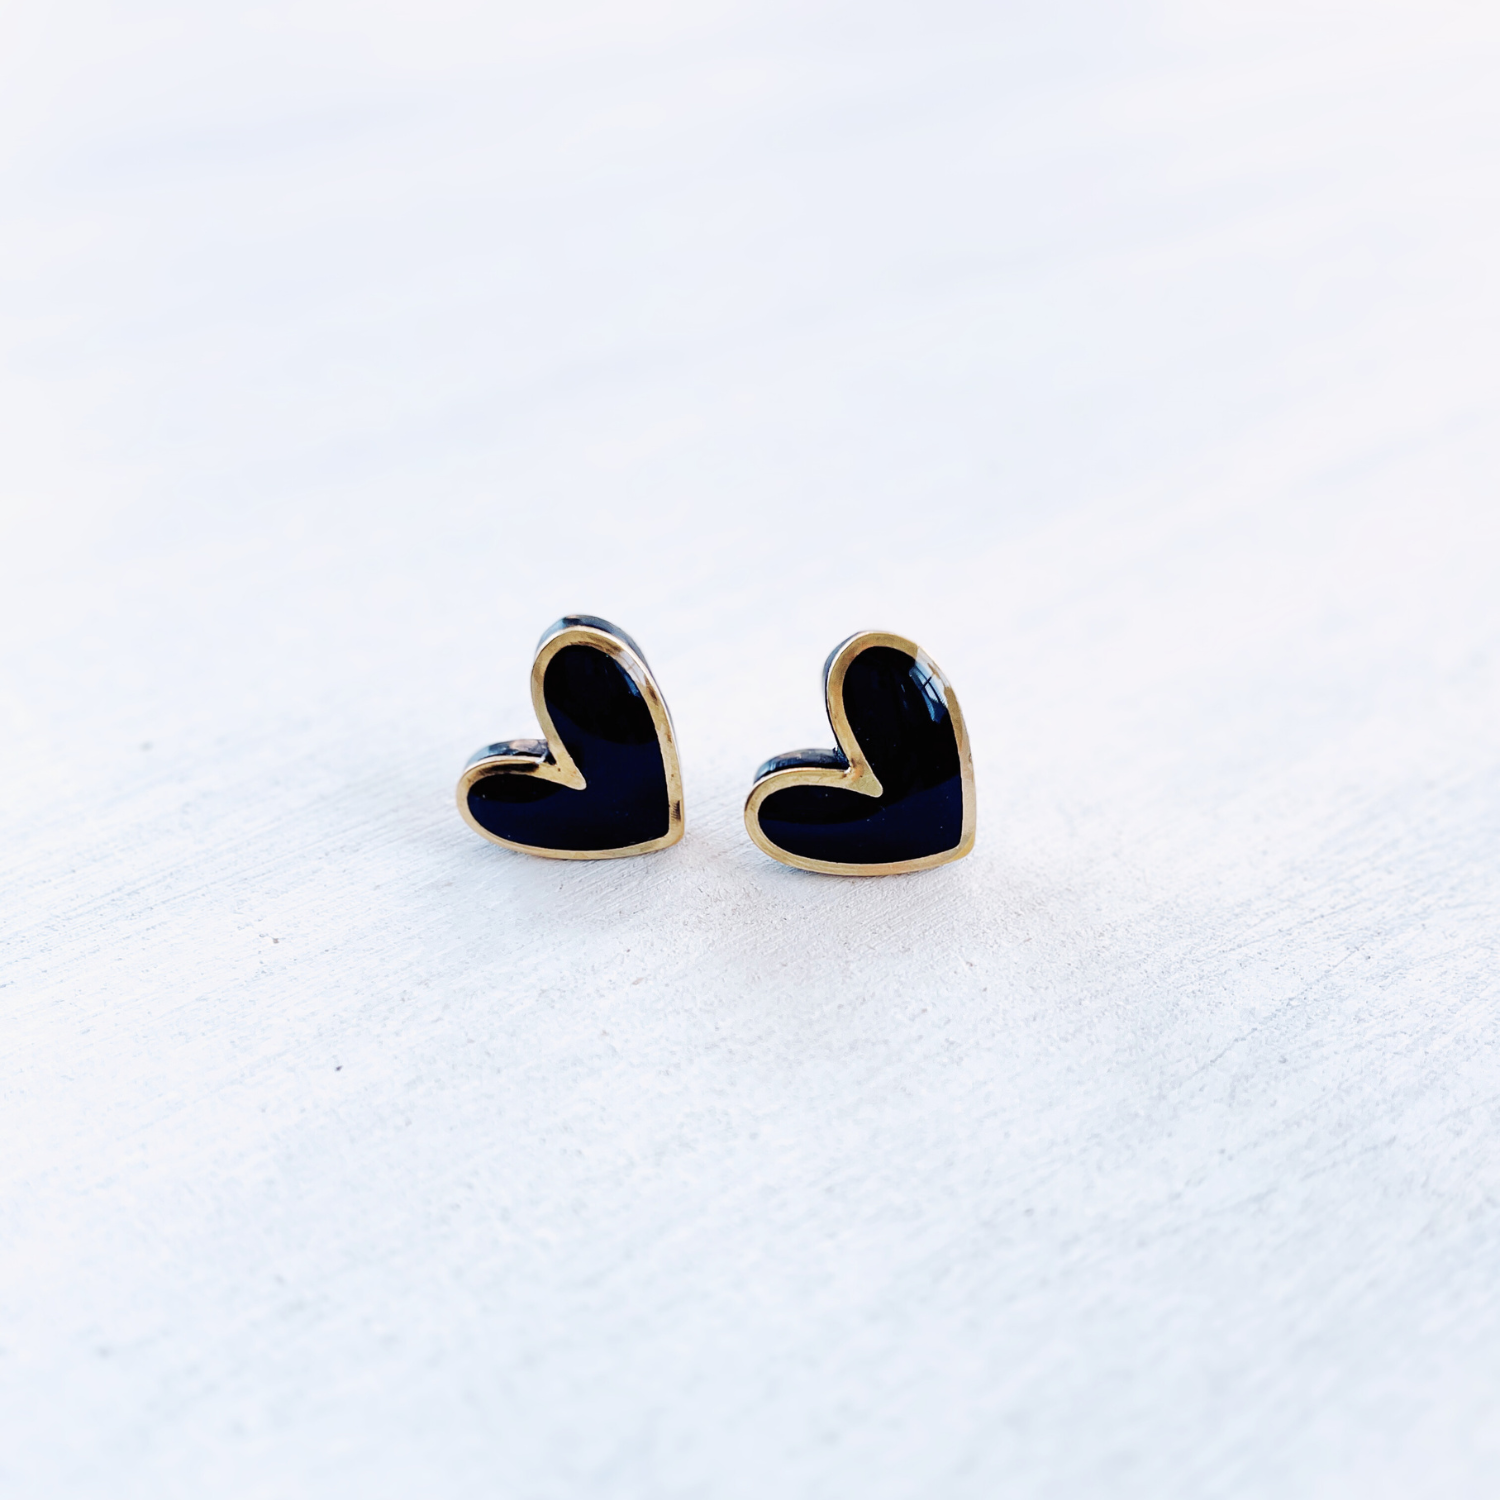 Polymer Clay Heart Stud Earrings with Gold Accent- Elegant Black